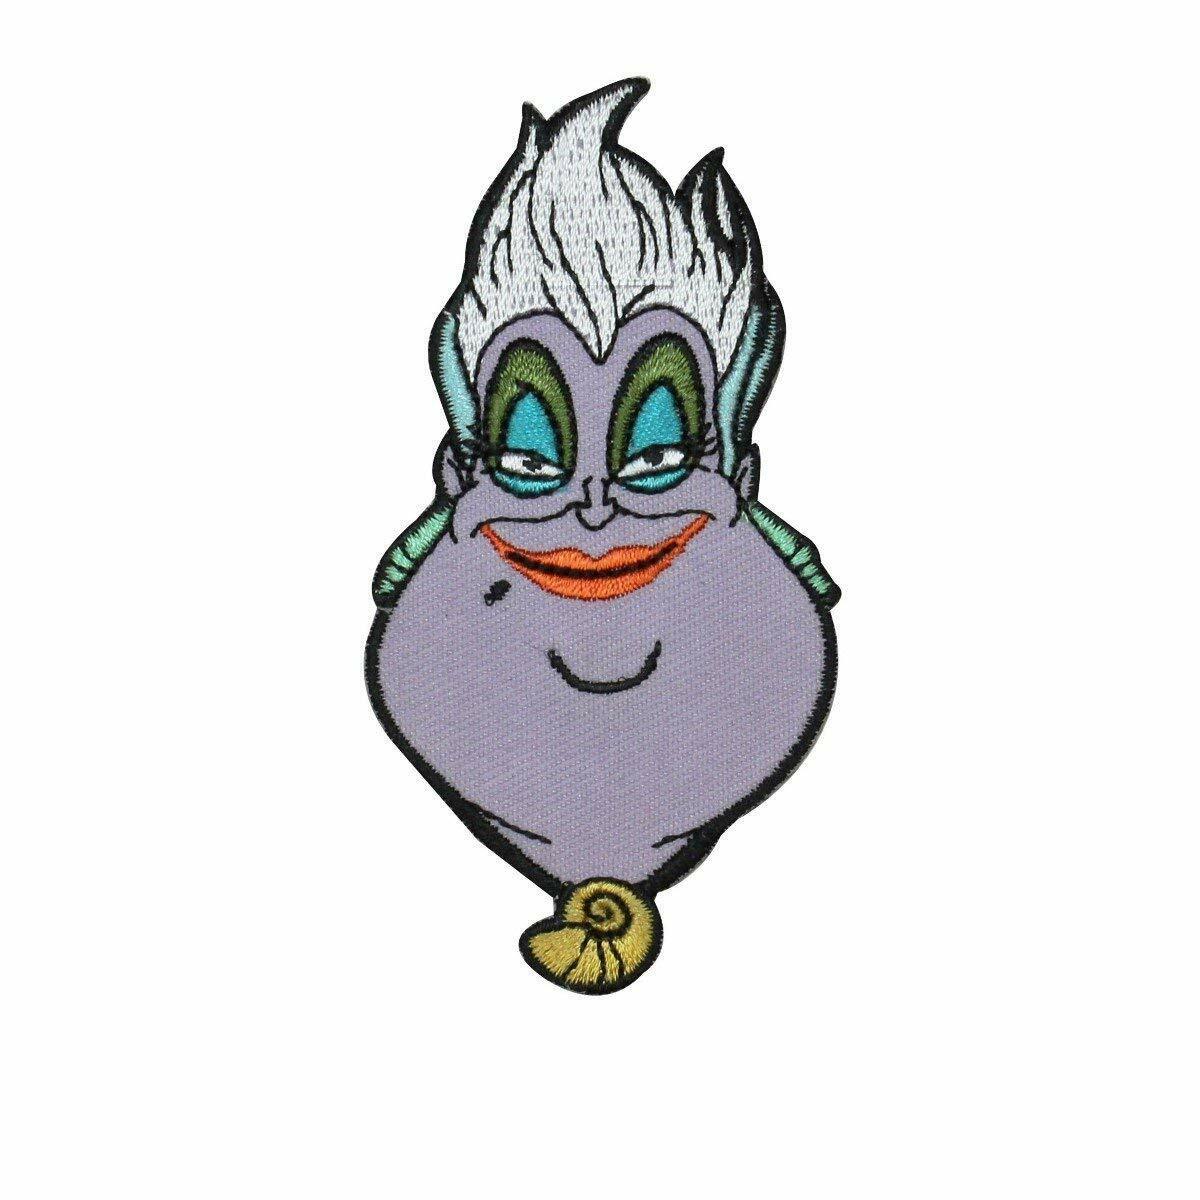 Disney The Little Mermaid Ursula Villain Embroidered Iron On Patch - 006-D